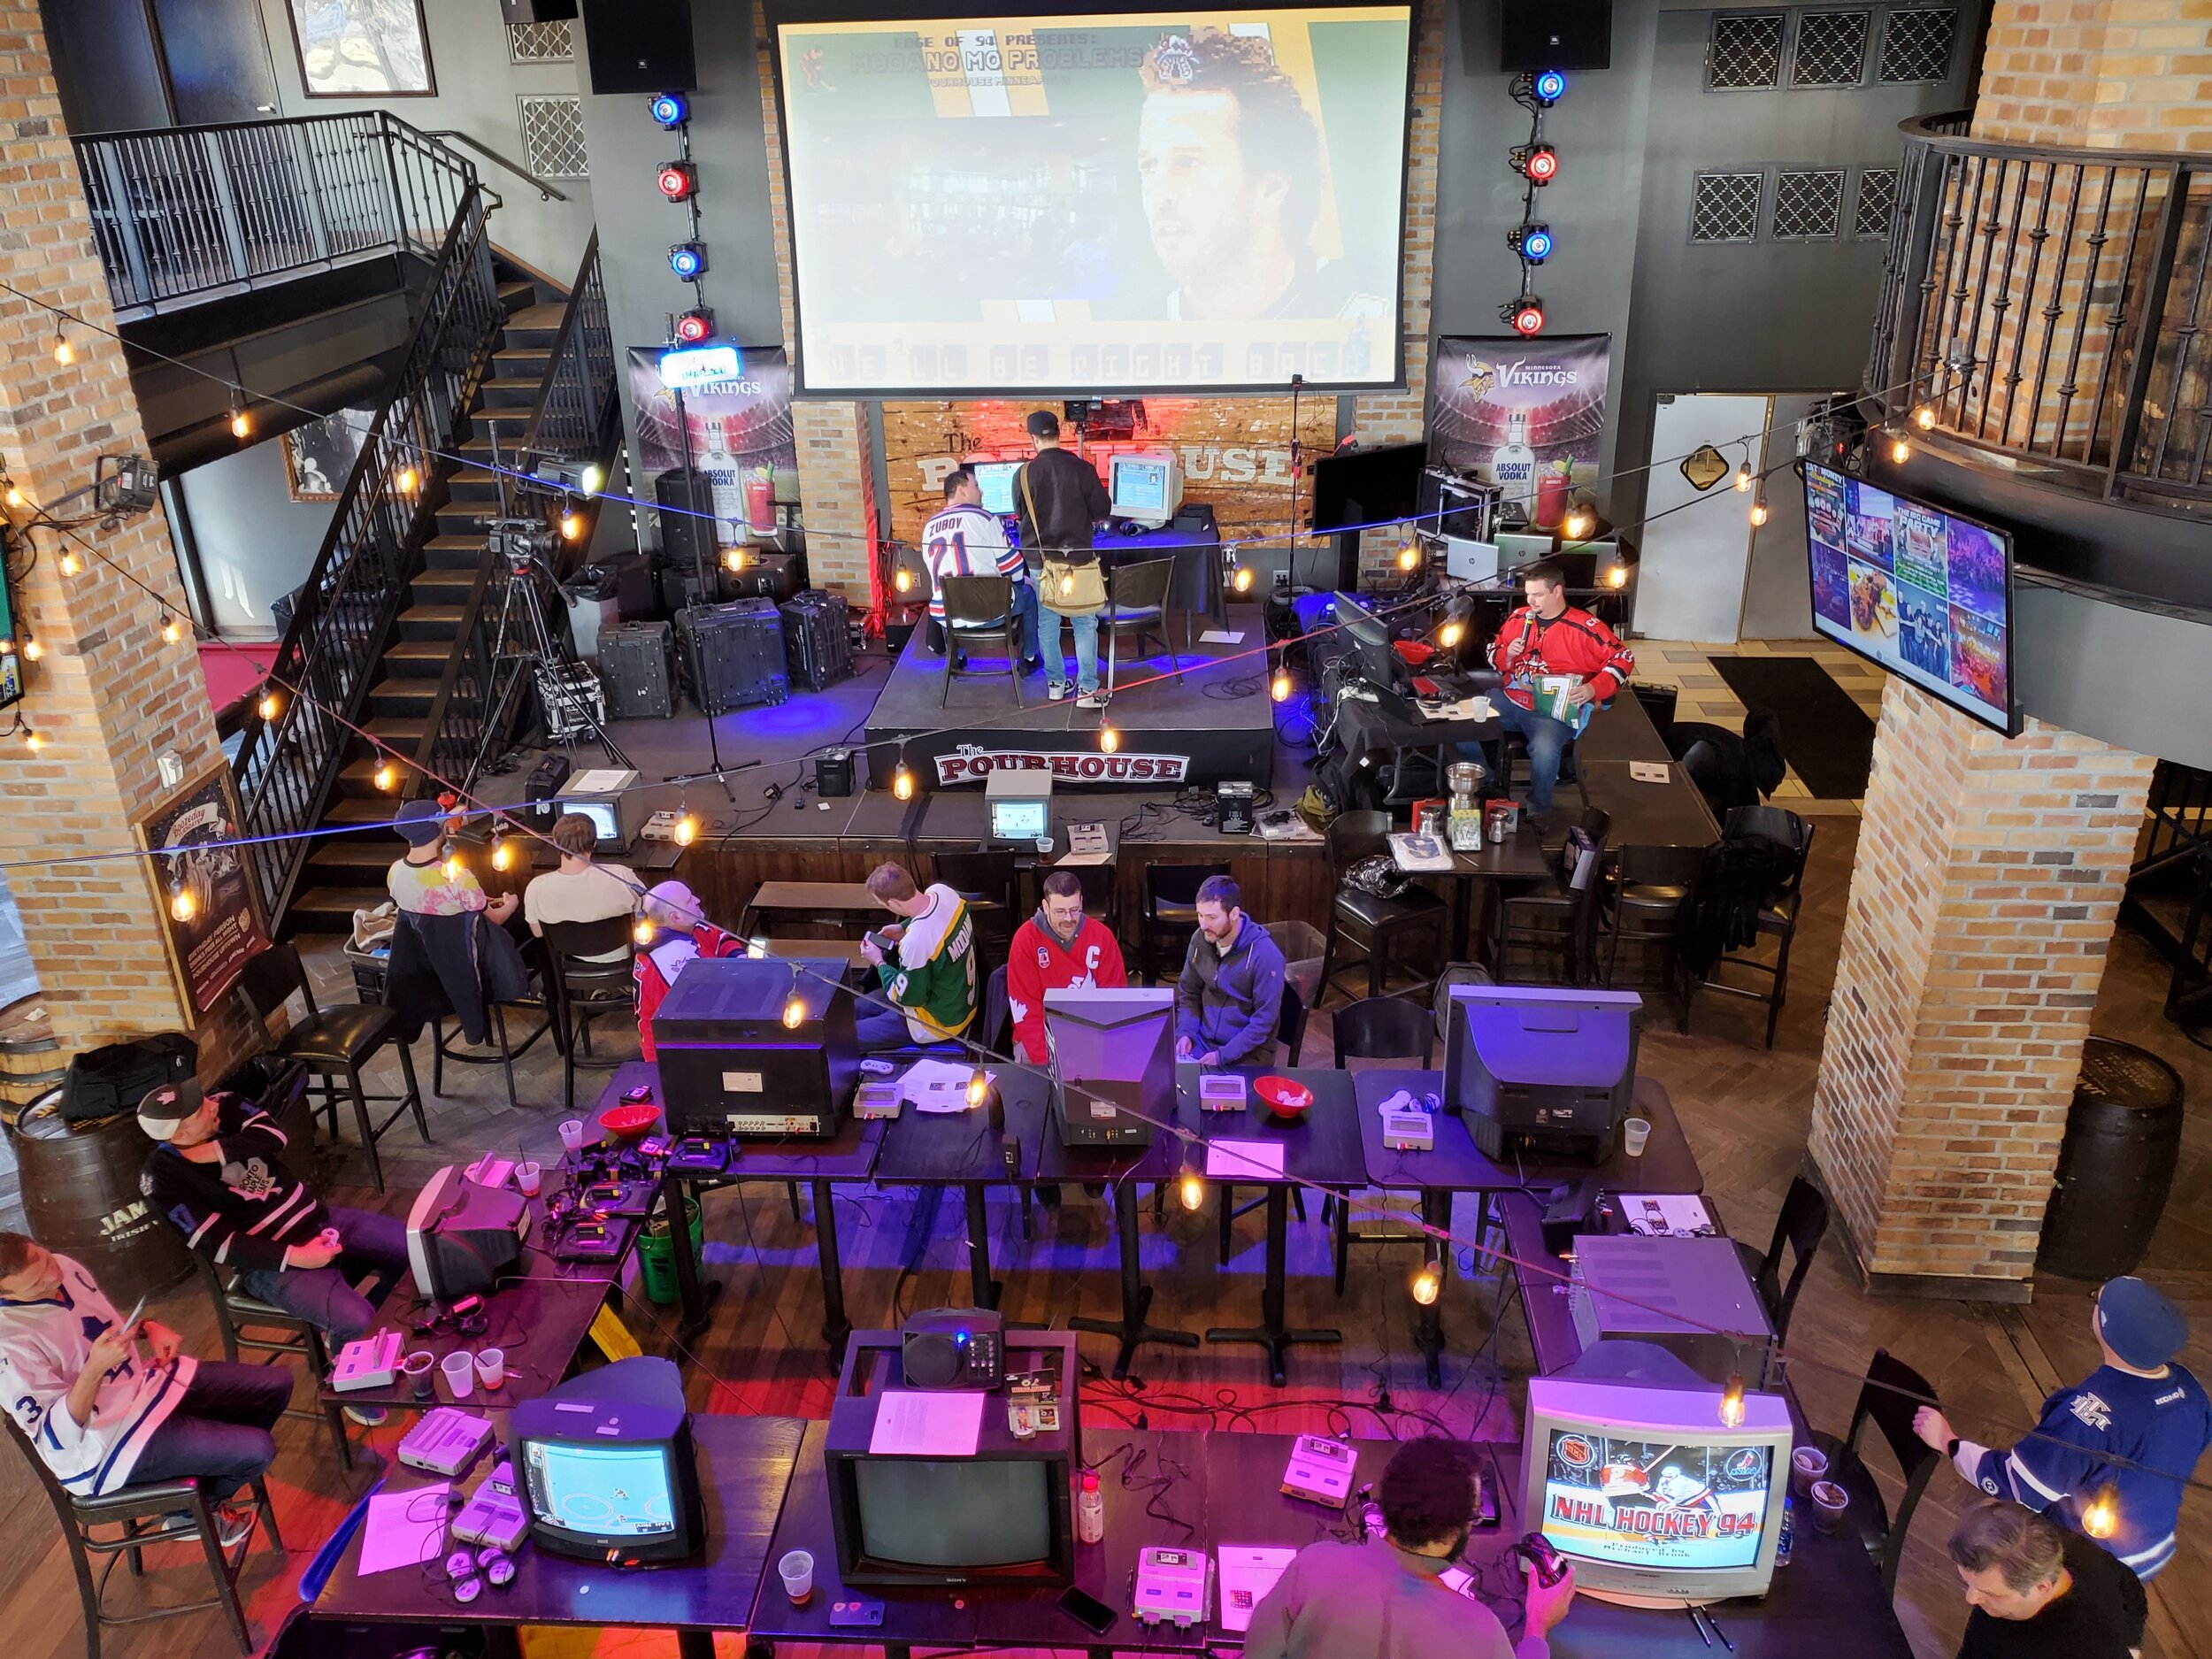 A/V Rental and Streaming Services for eSports Event In Minneapolis — Audio Visual Equipment Rental Company Minneapolis MN